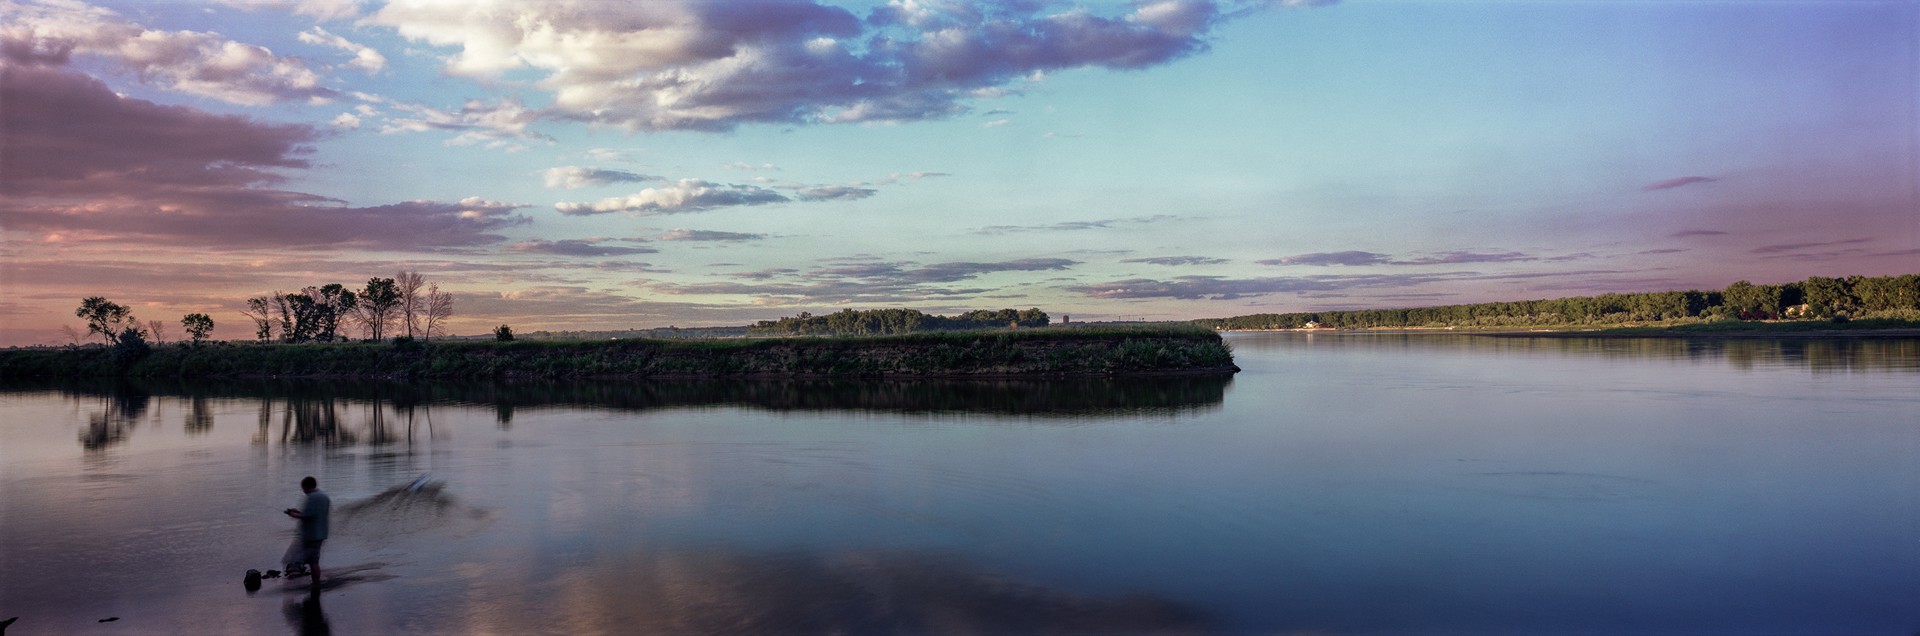 The Confluence of the Knife & Missouri Rivers, Fort Lincoln, North Dakota by Lawrence McFarland